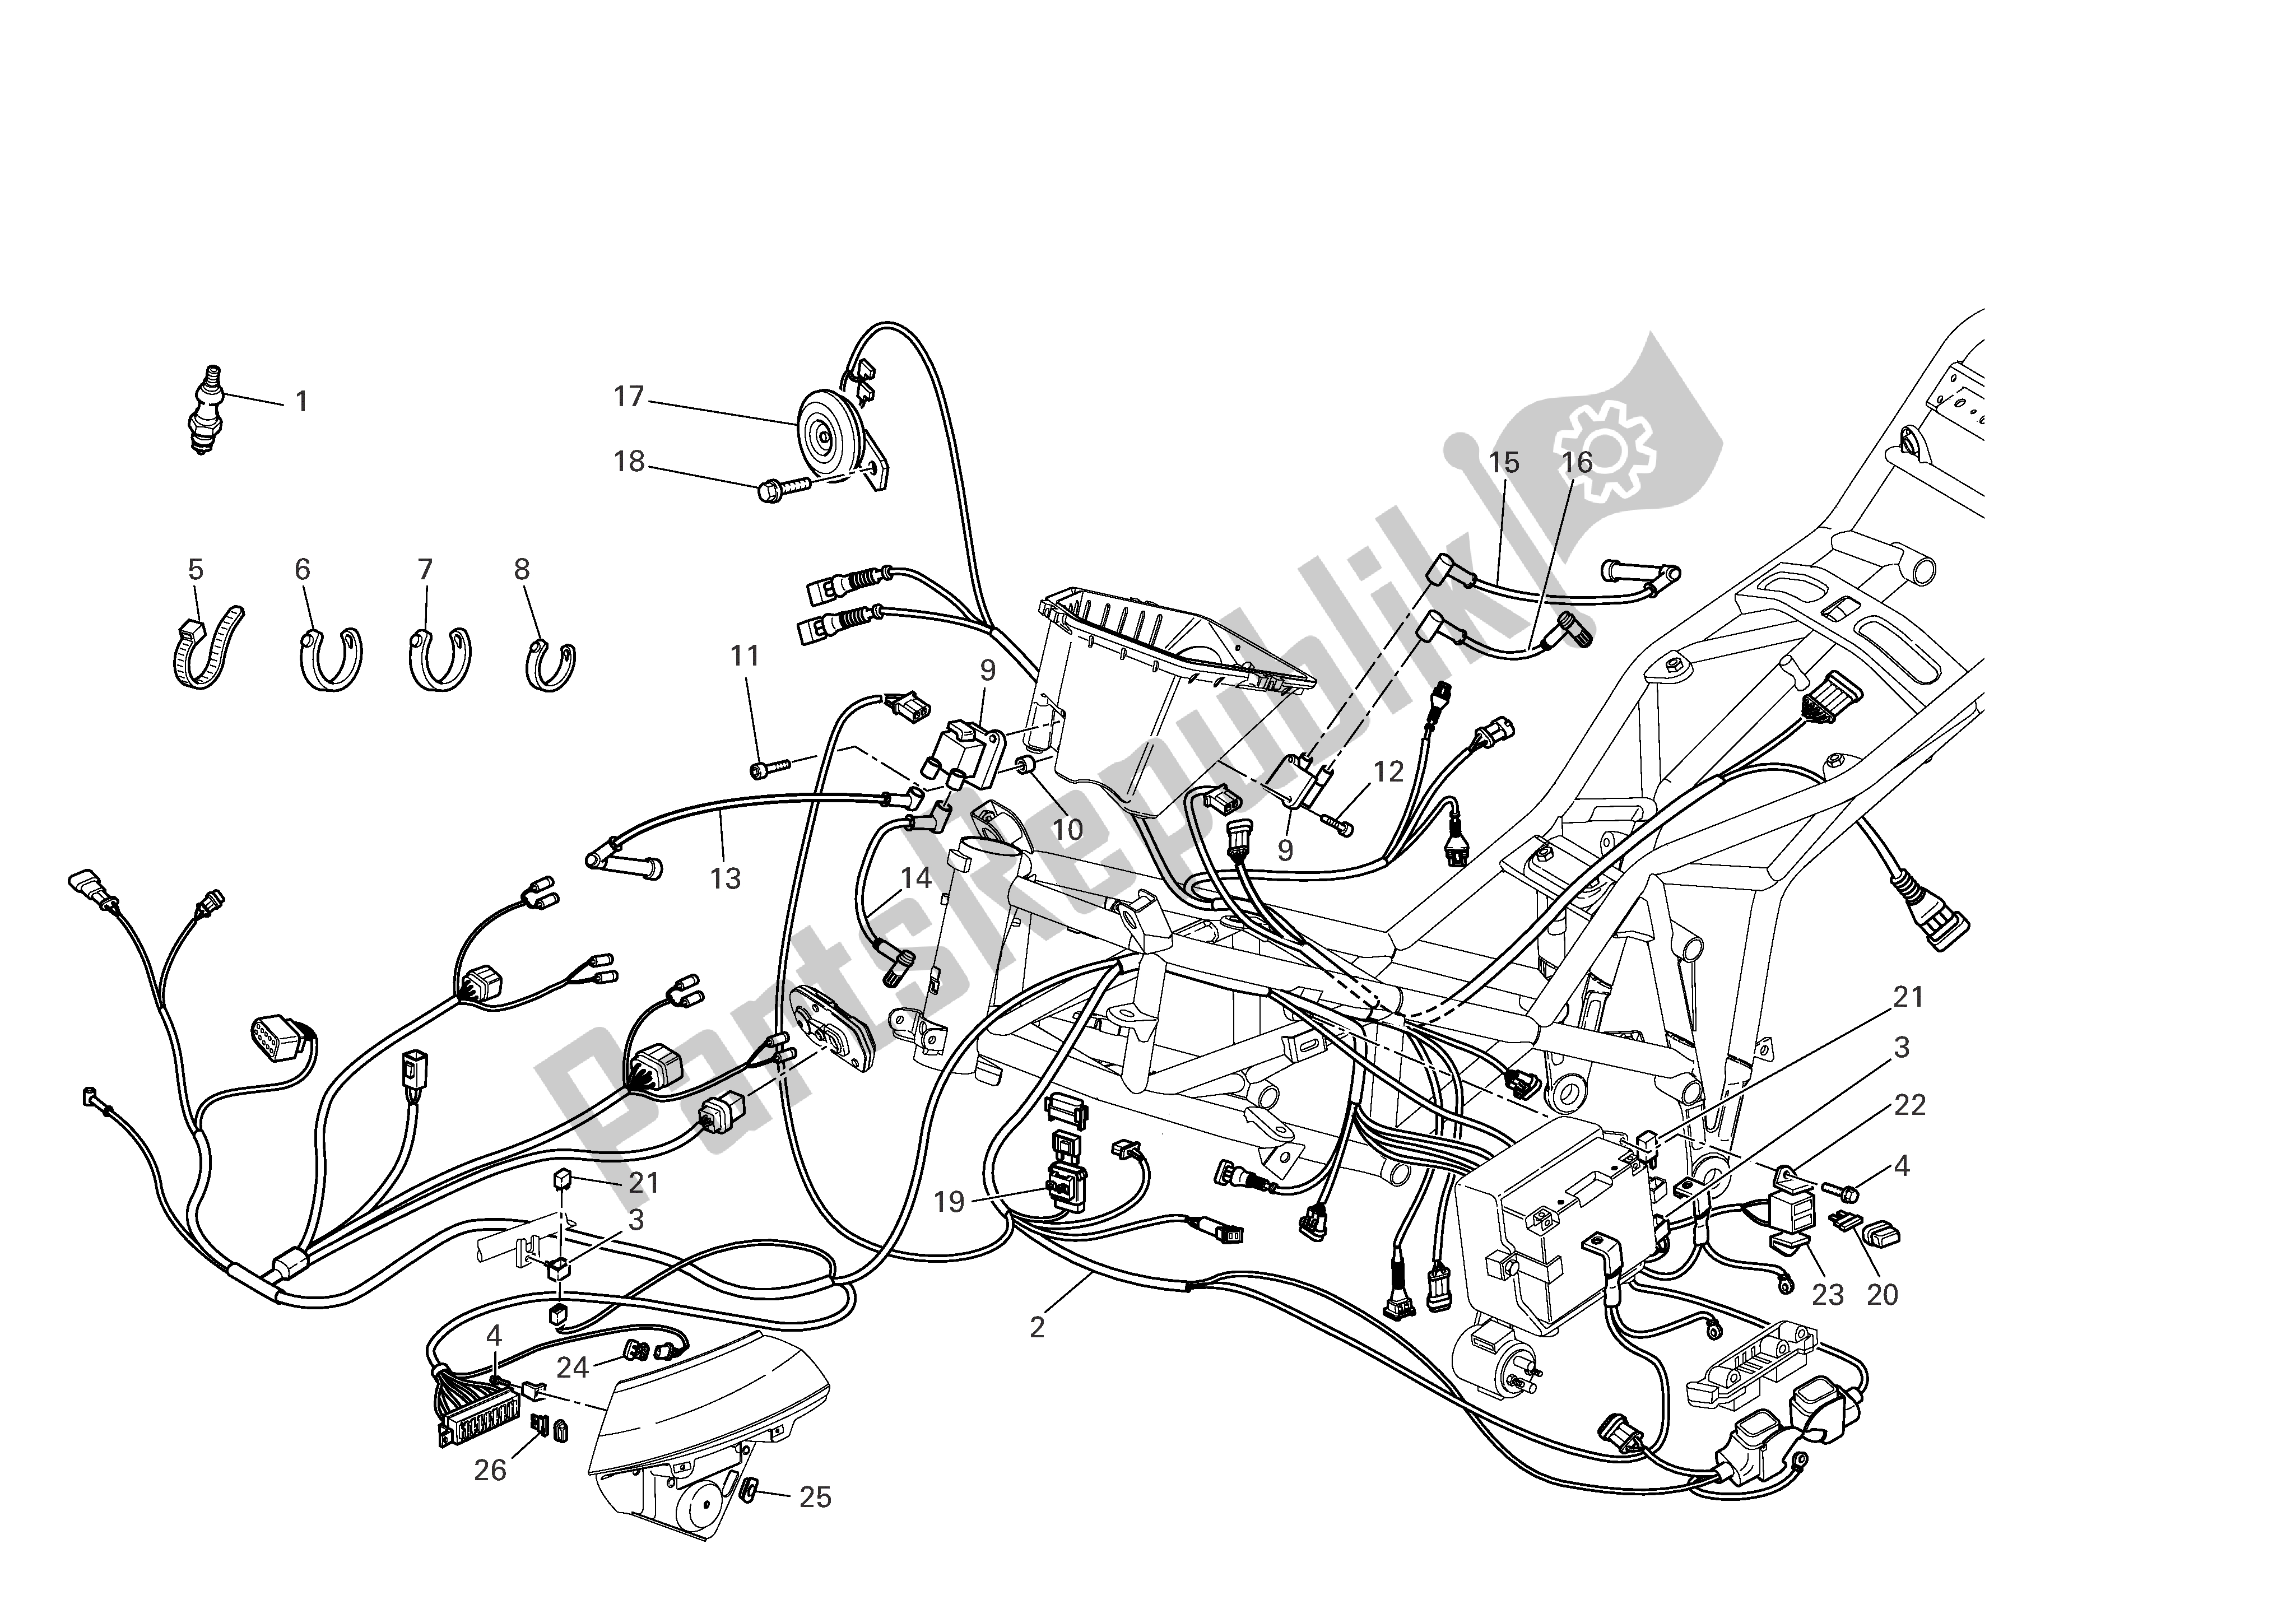 All parts for the Electrical System of the Ducati Multistrada 1000 2005